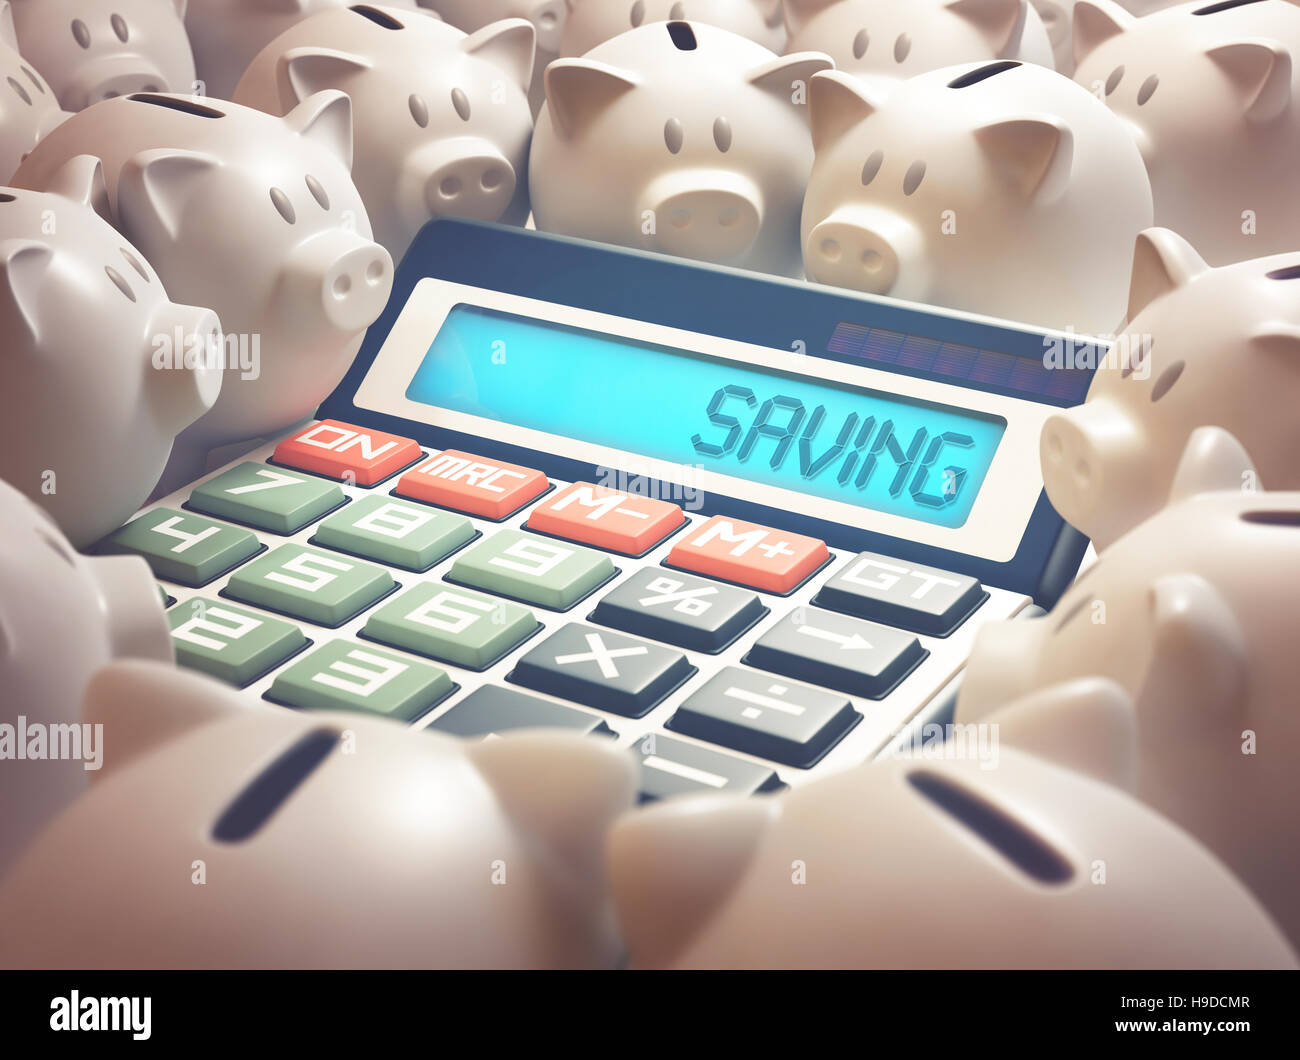 Calculator amid several piggy banks showing on the display the word "SAVING". 3D illustration, business and finance concept. Stock Photo